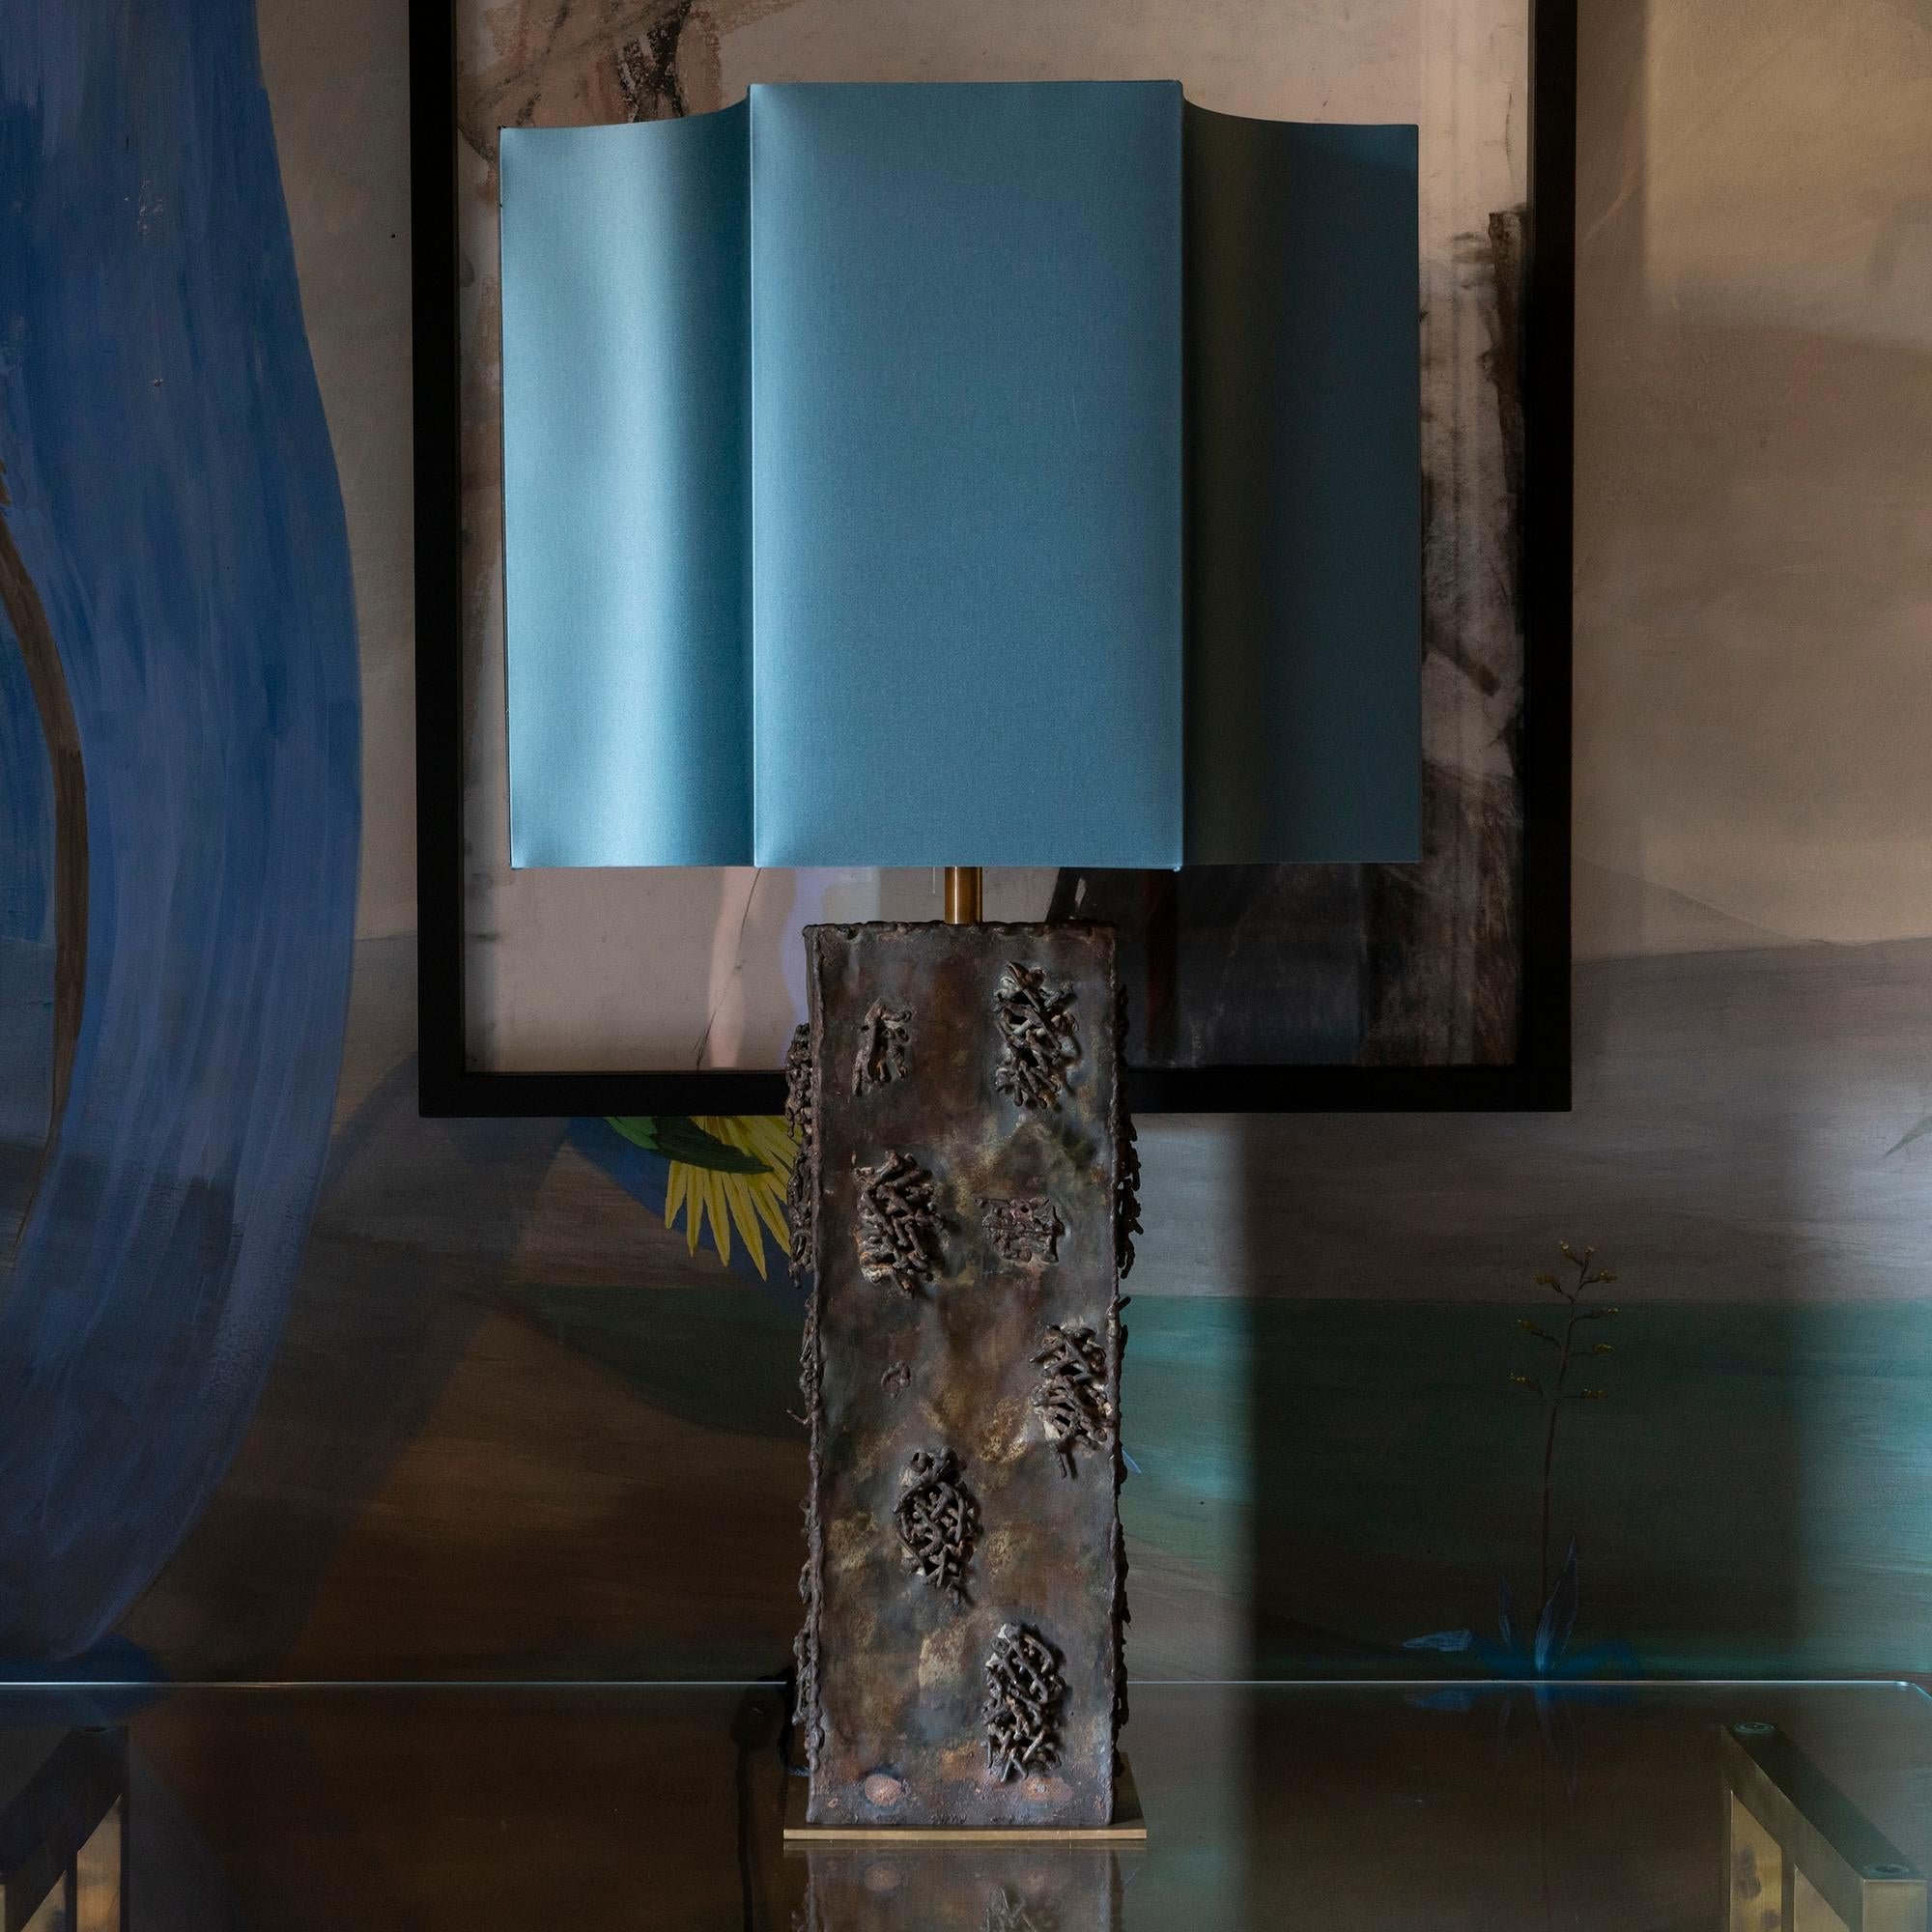 Table lamp in brut steel with vintage patina, visible cuts and weldings, lamp measurements are cm20x20x h.60 plus silk lampshade cm50x50x h.40, total high cm94, Italy 1970's circa.